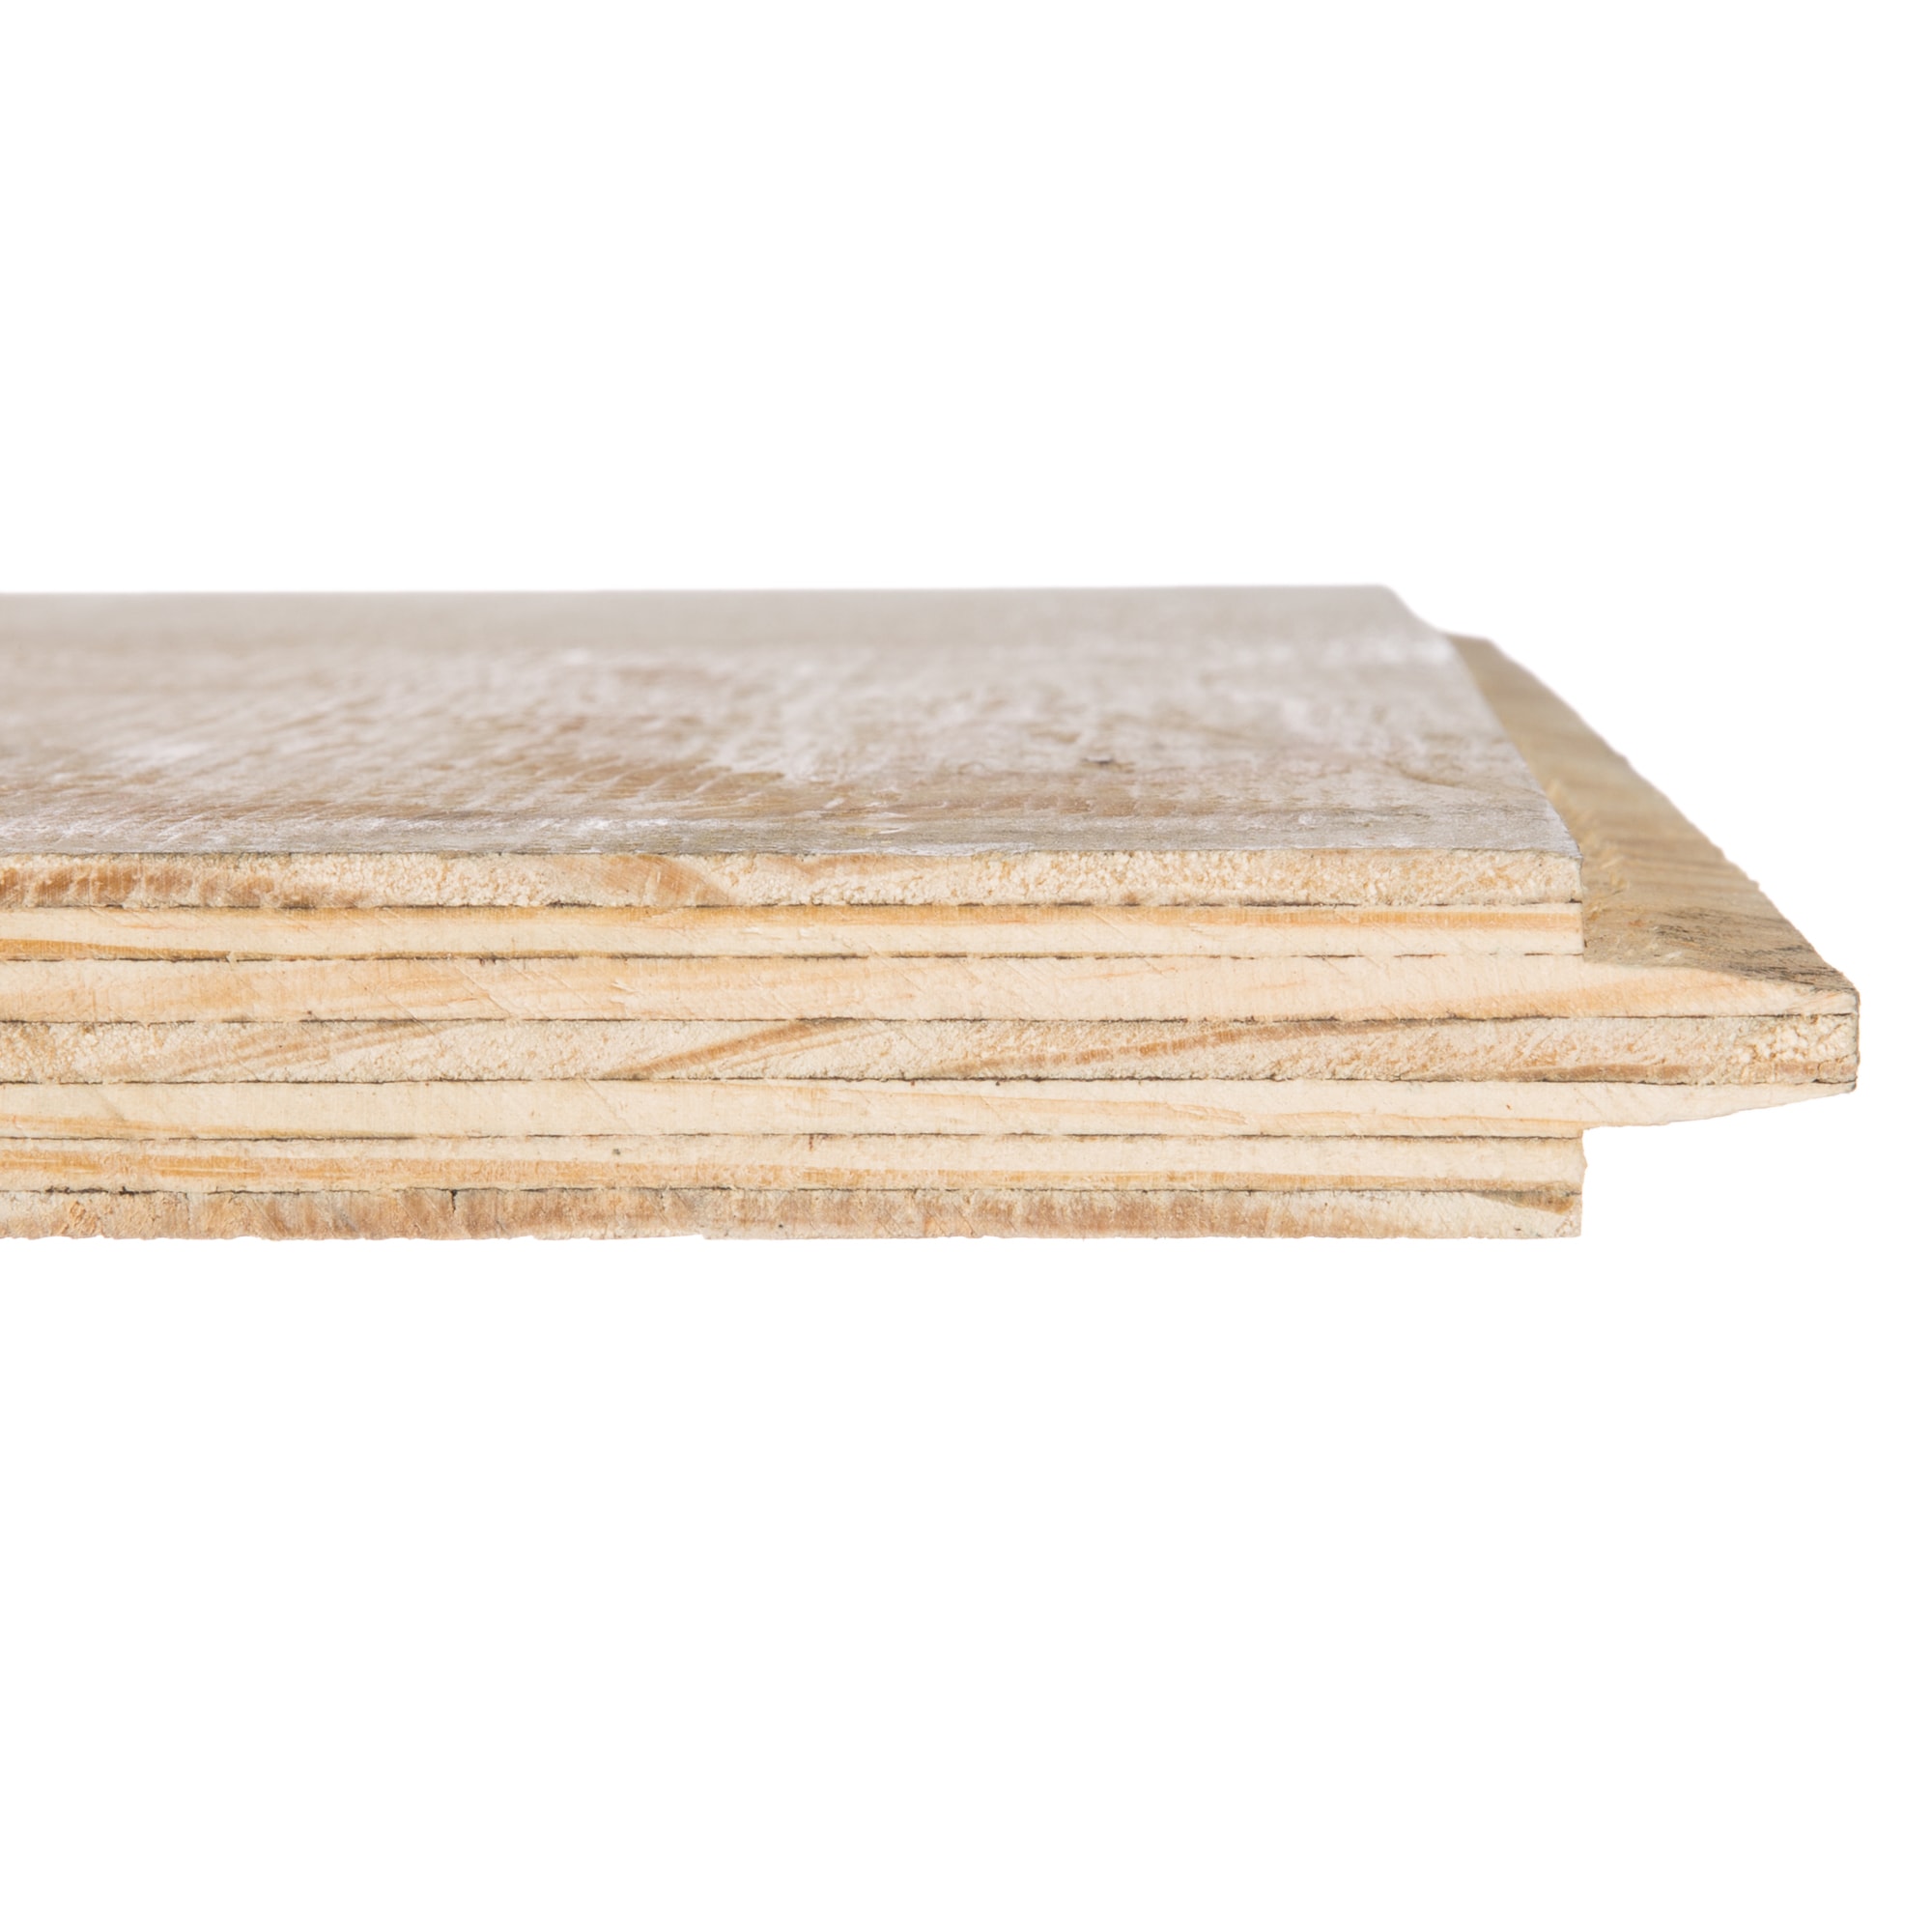 Plytanium 1-1/8-in x 4-ft x 8-ft Pine Plywood Subfloor in the Plywood ...